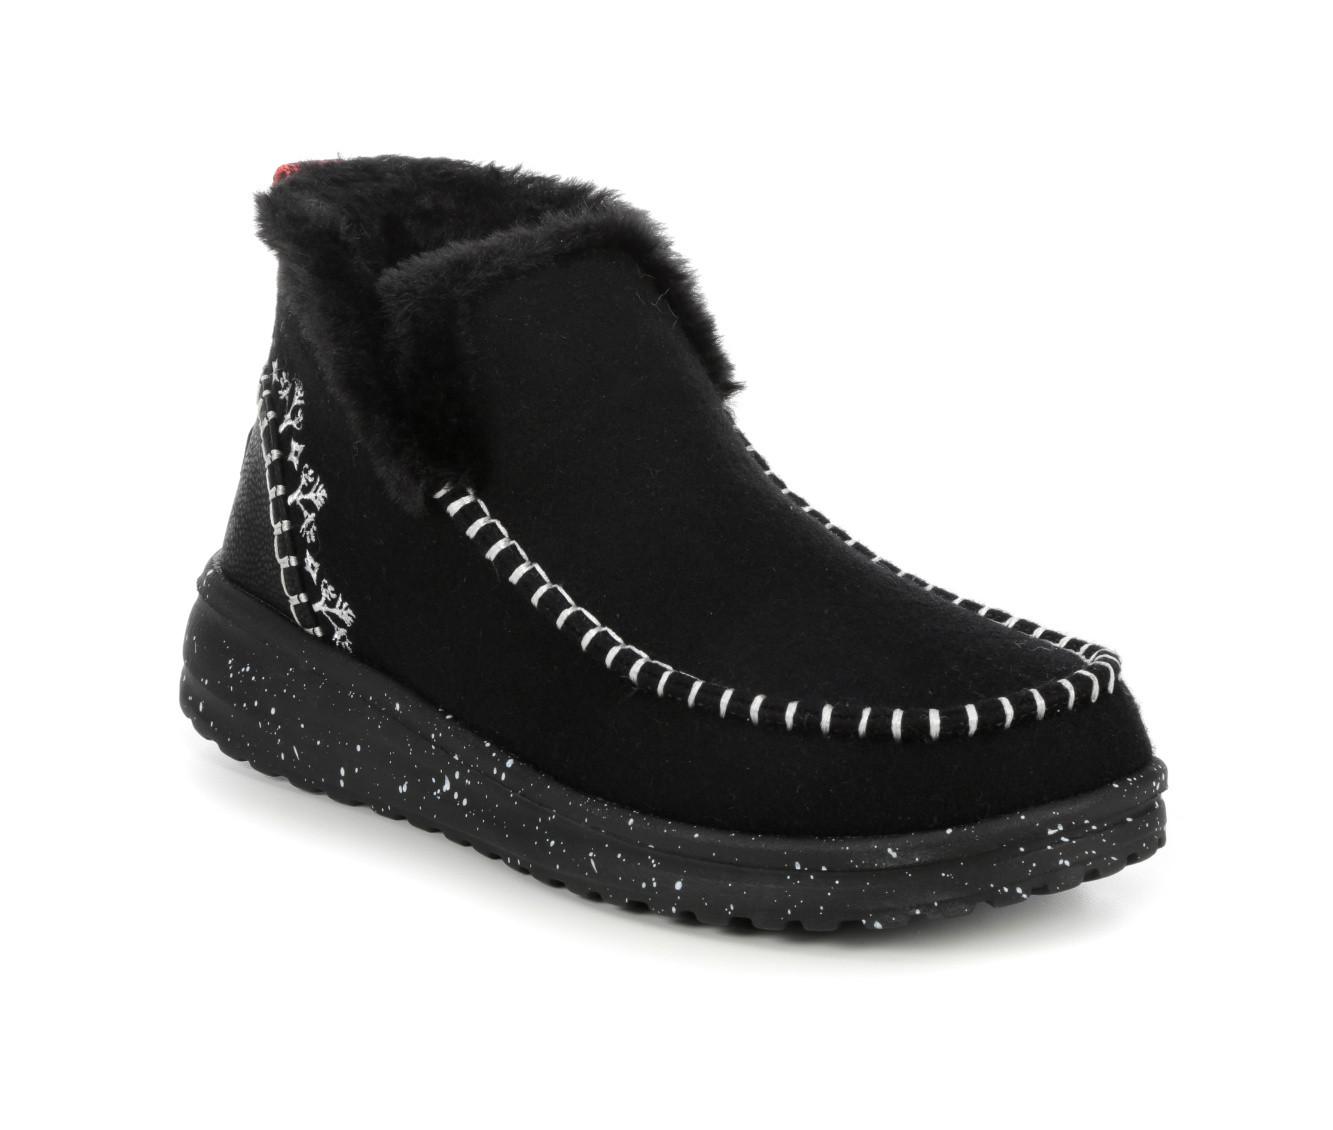  Hey Dude Denny Heavy Canvas Black/Black Size 5, Women's Boots, Women's Pull on Boots, Comfortable & Light-Weight